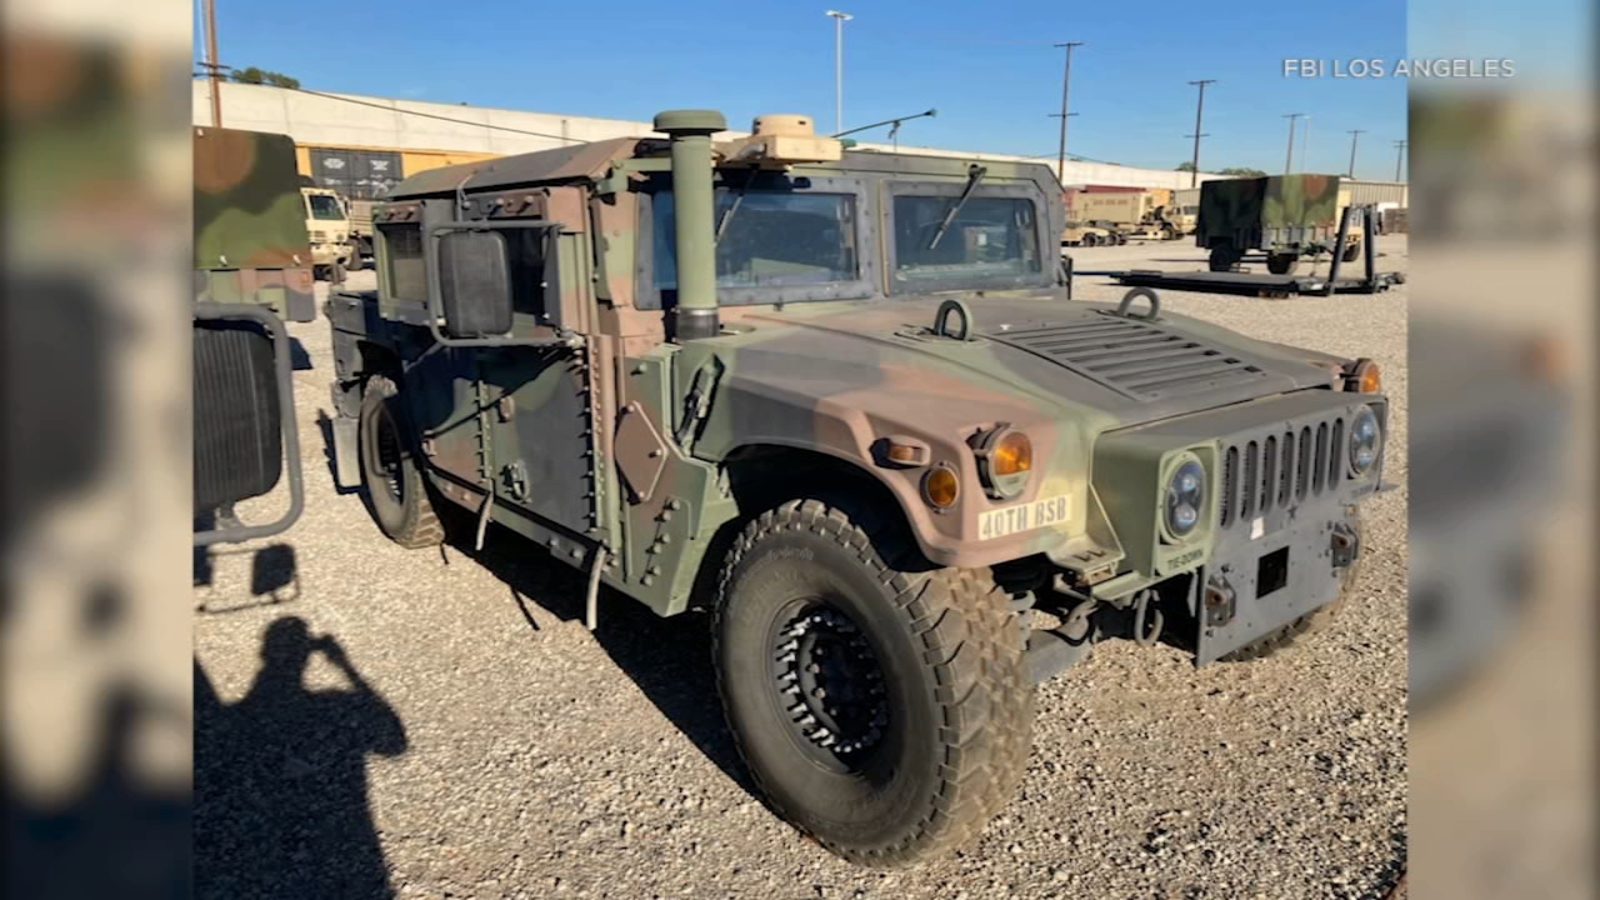 FBI searching for armored military Humvee stolen from National Guard facility in Bell Los Angeles